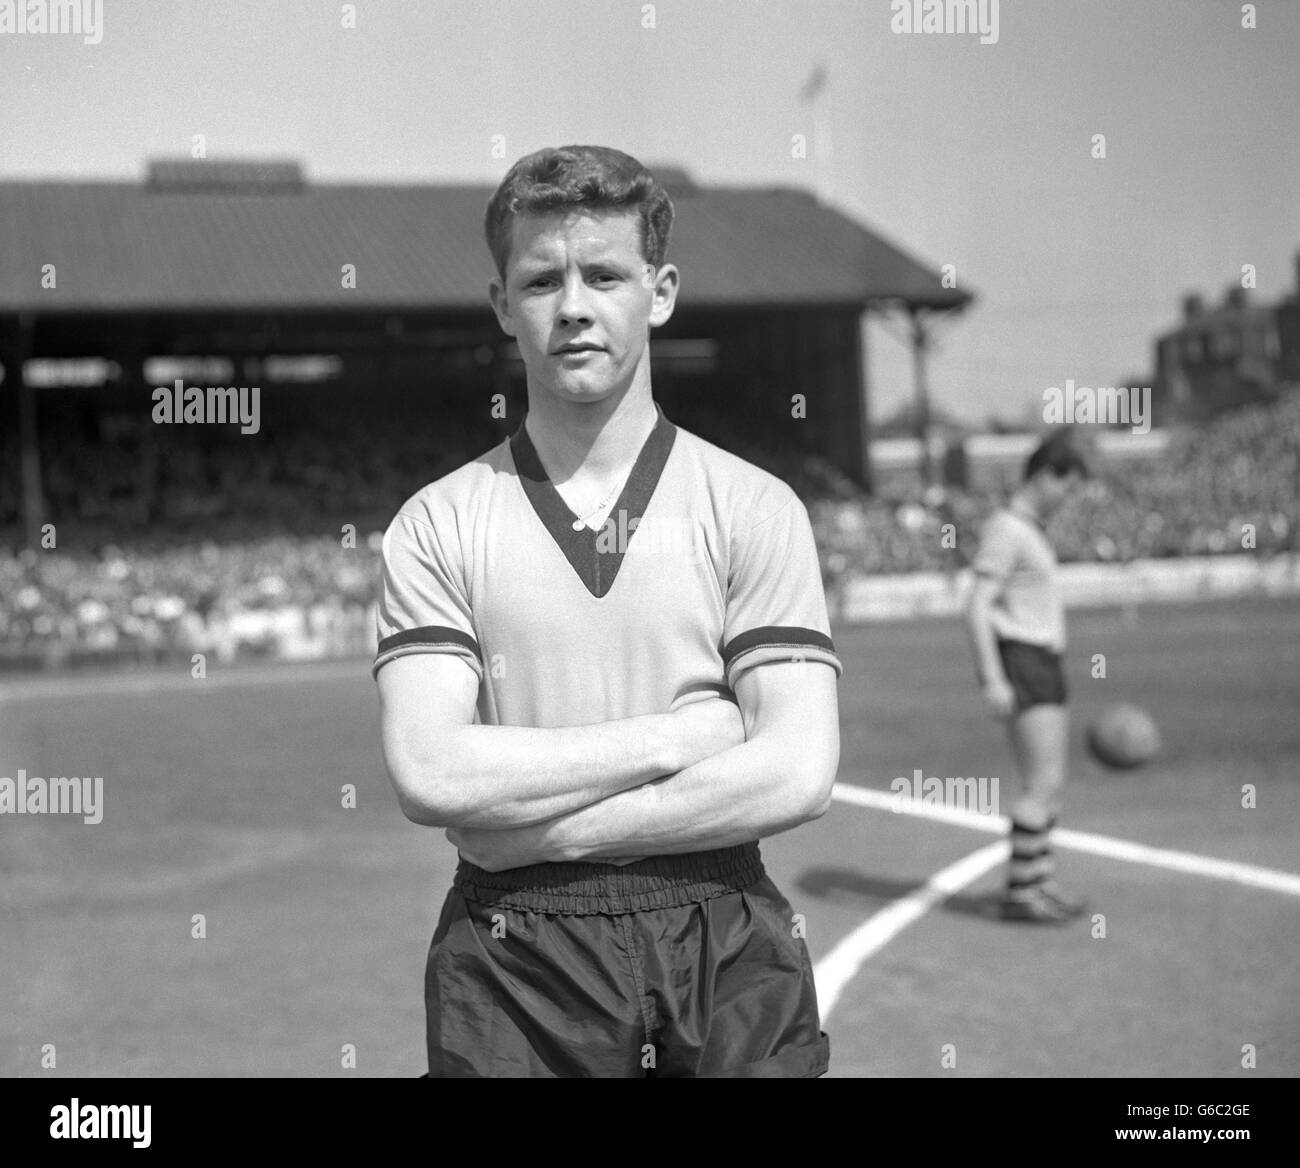 Soccer - First Division - Wolverhampton Wanderers centre forward Barry Stobart Stock Photo